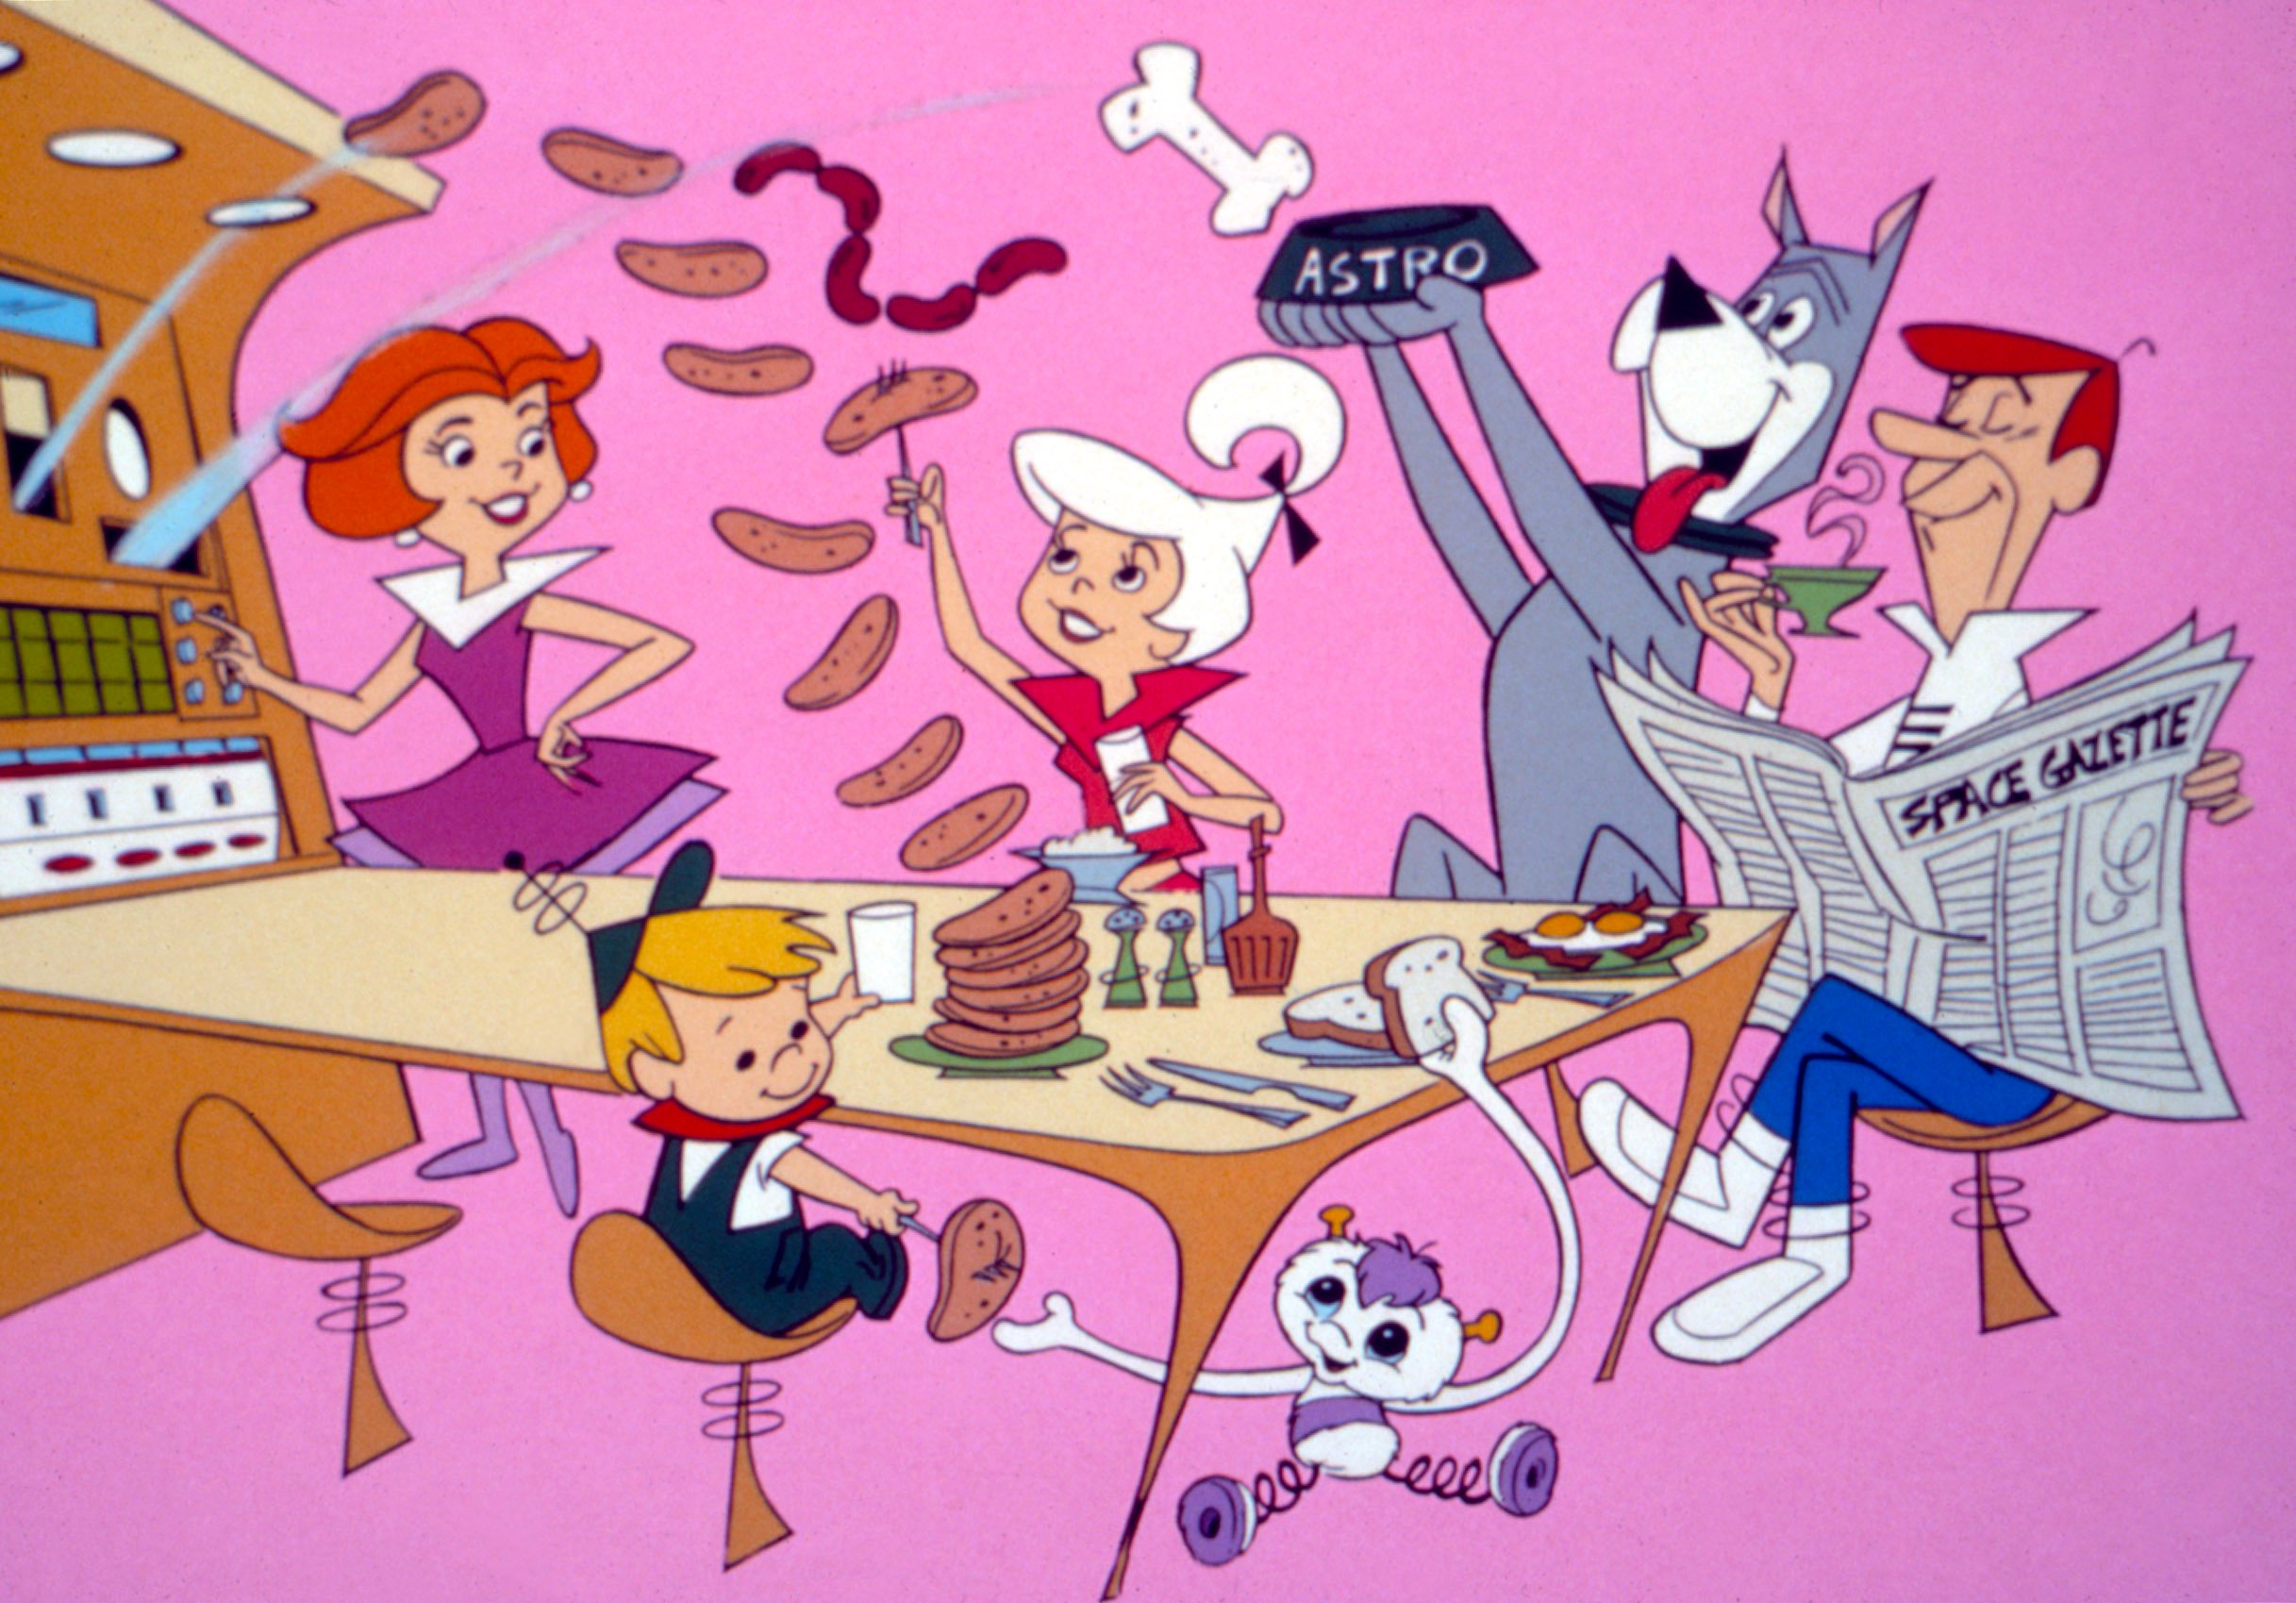 Twitter users noticed that George Jetson, the Spacely Sprockets employee, h...